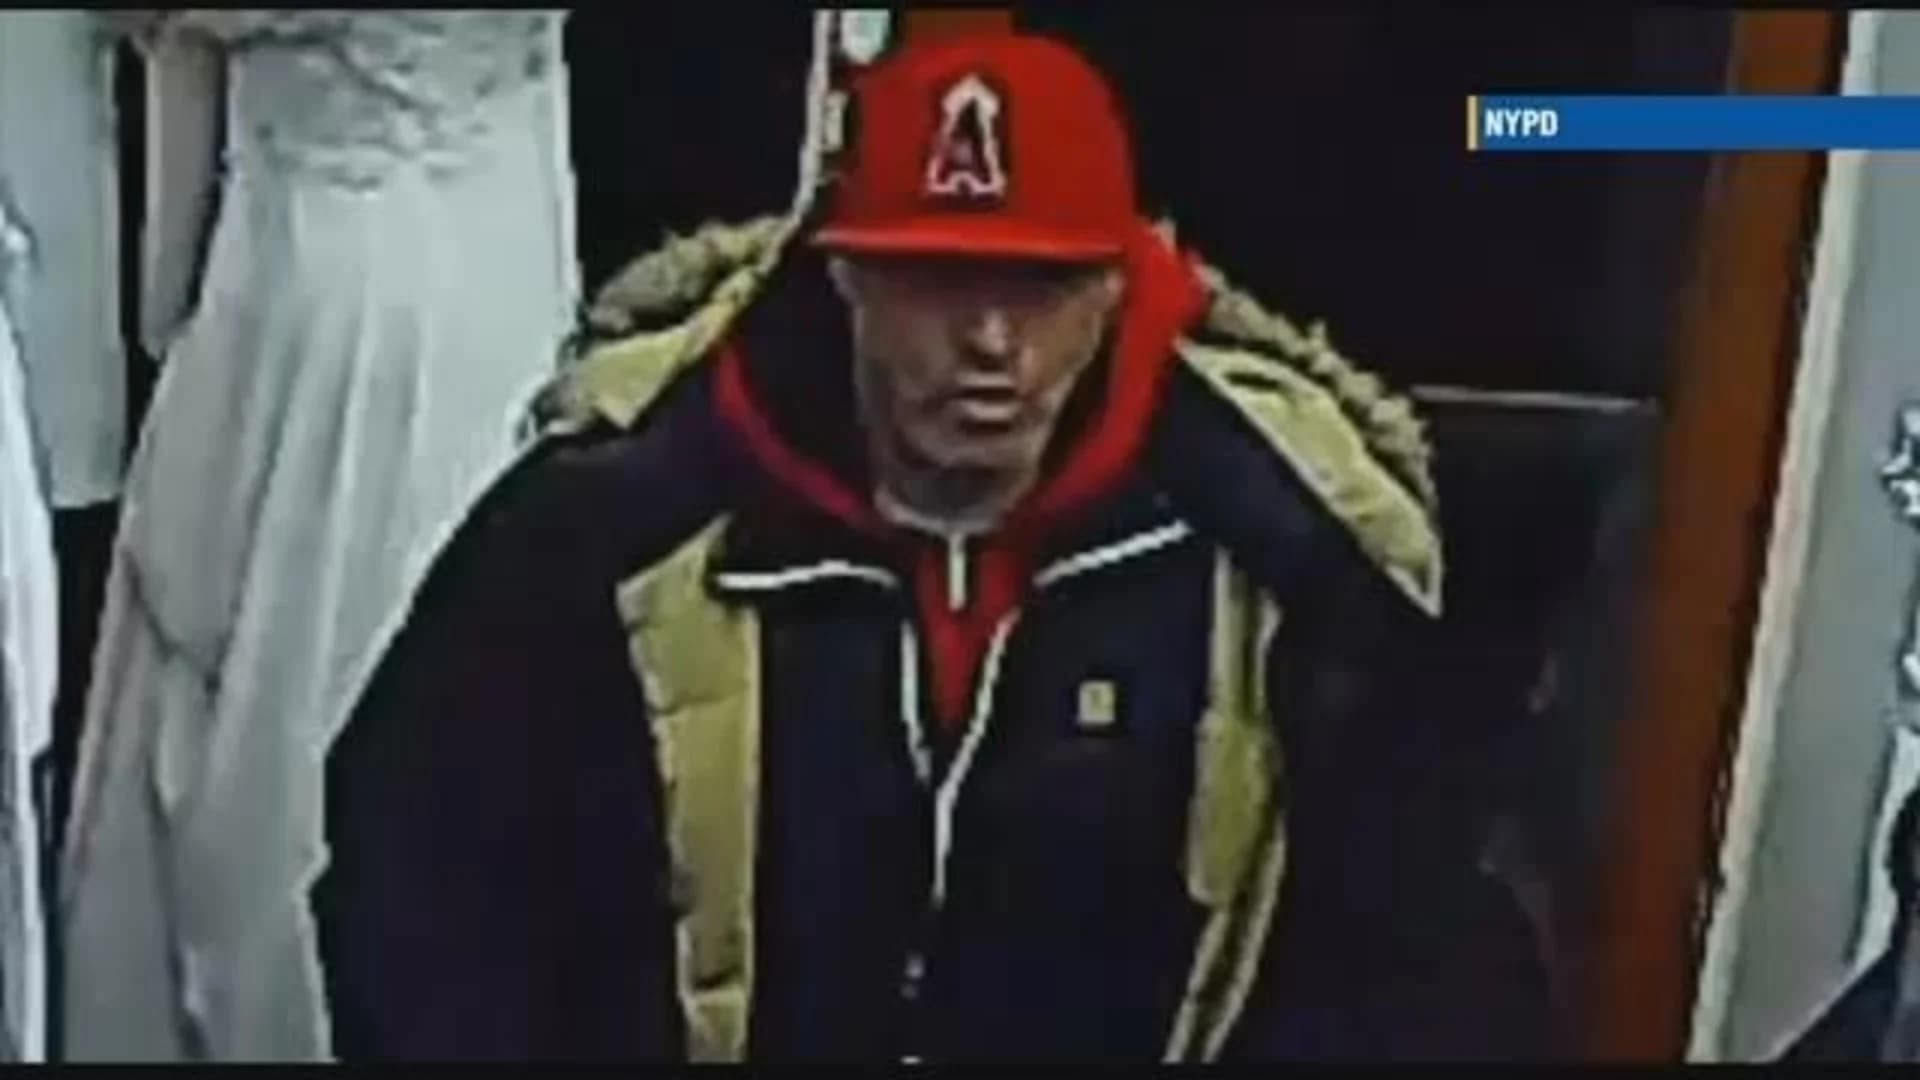 NYPD: Man wanted for robbing E. 165th St. cleaners at gunpoint